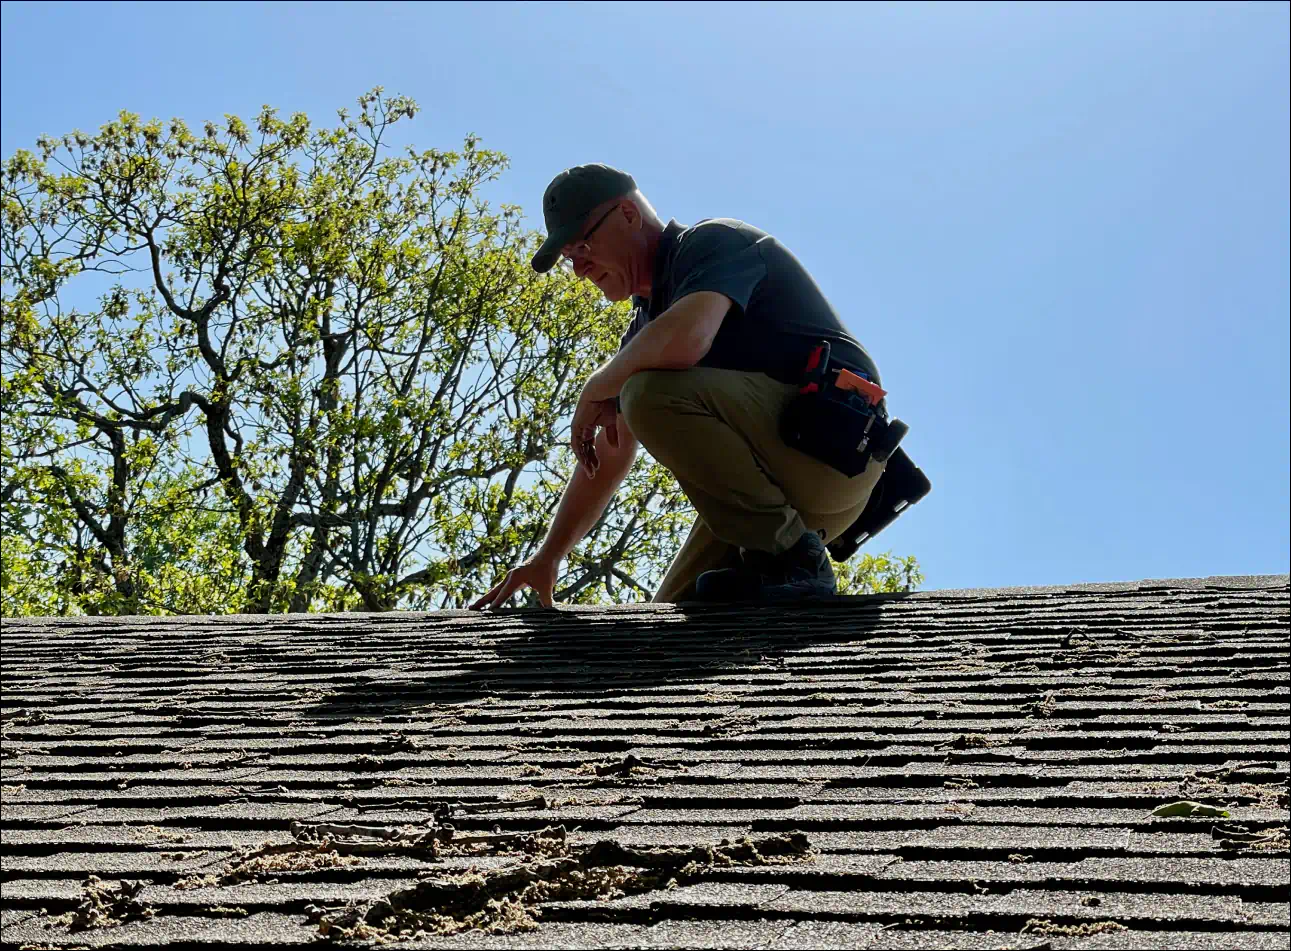 brett smith inspecting the roofing of an oklahoma house